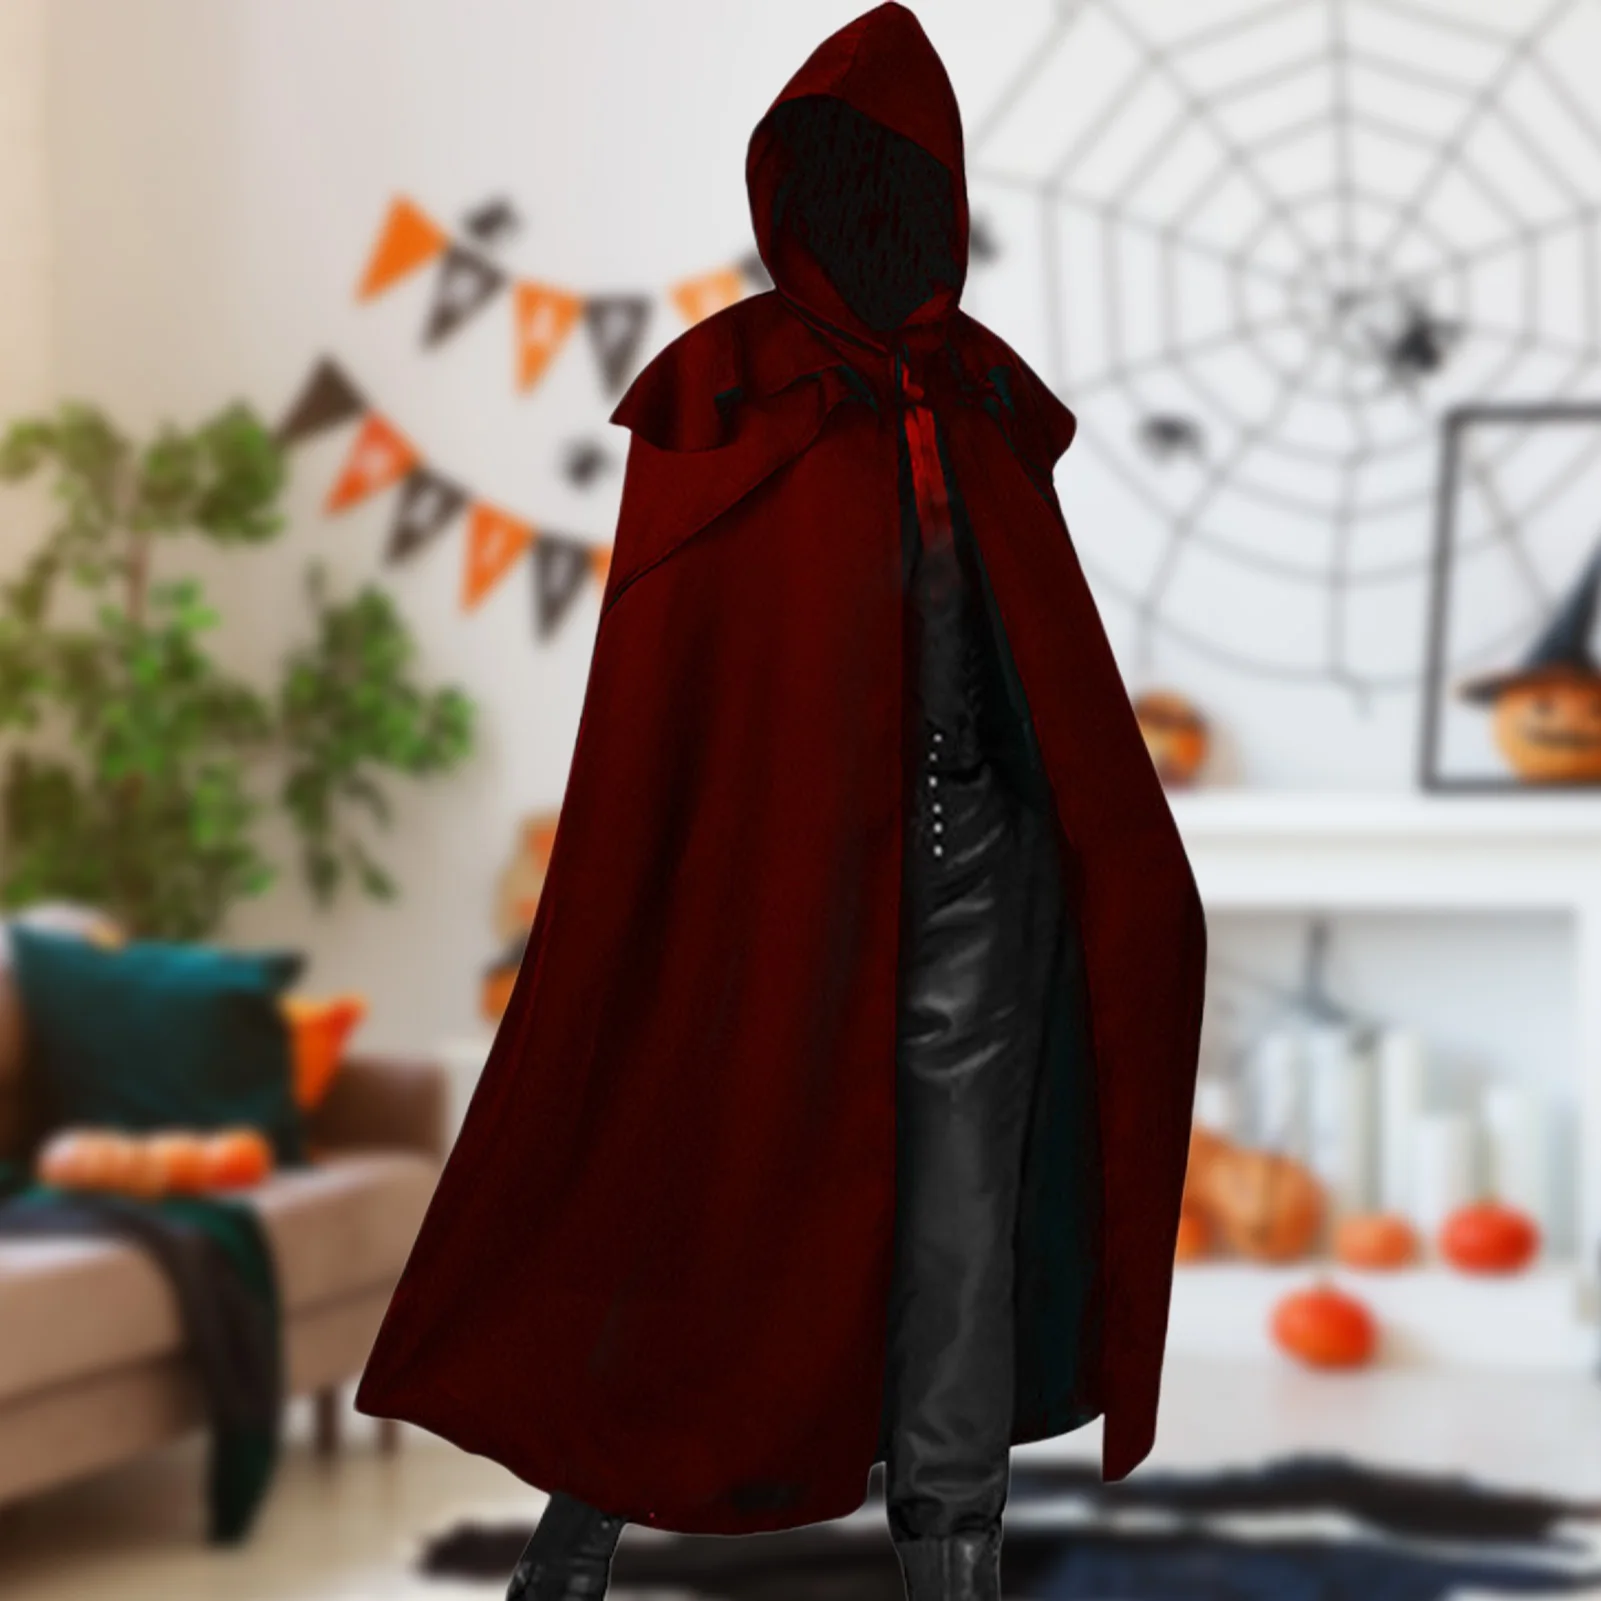 

Gothic Hooded Cape Loose Death Hooded Cape Vintage Style Basic Hooded Cape Solid Color Men Oversized Lace Up Vacation Outfit